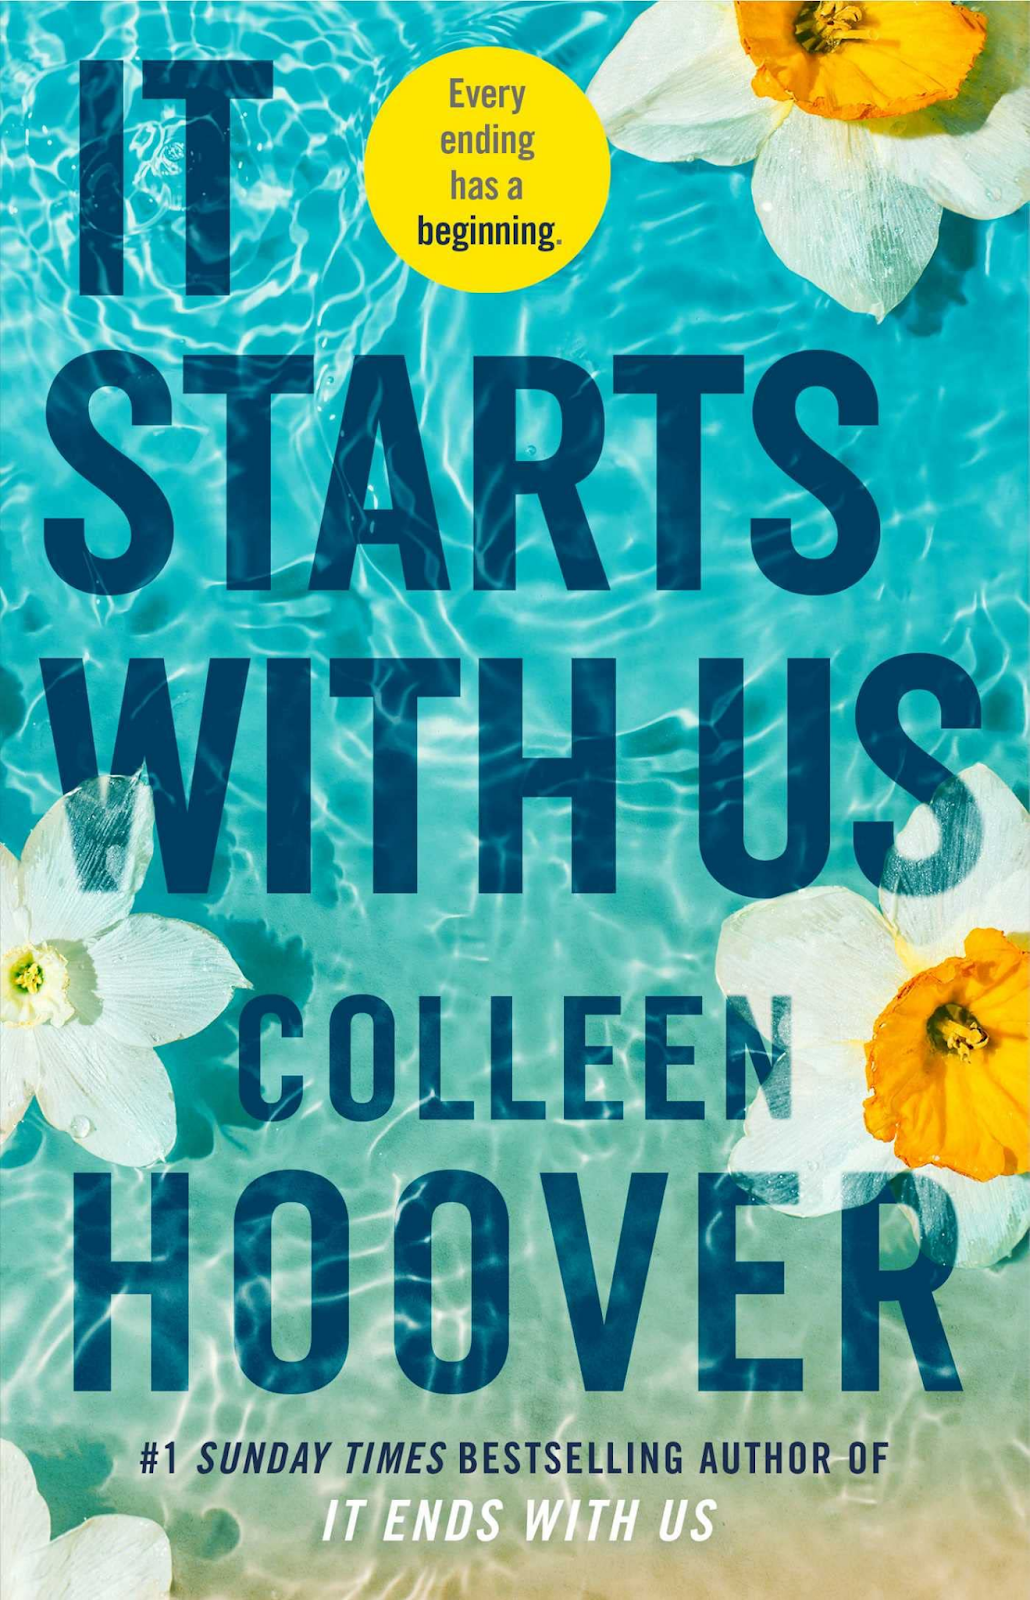 A Summary Of “It Starts With Us” By Colleen Hoover